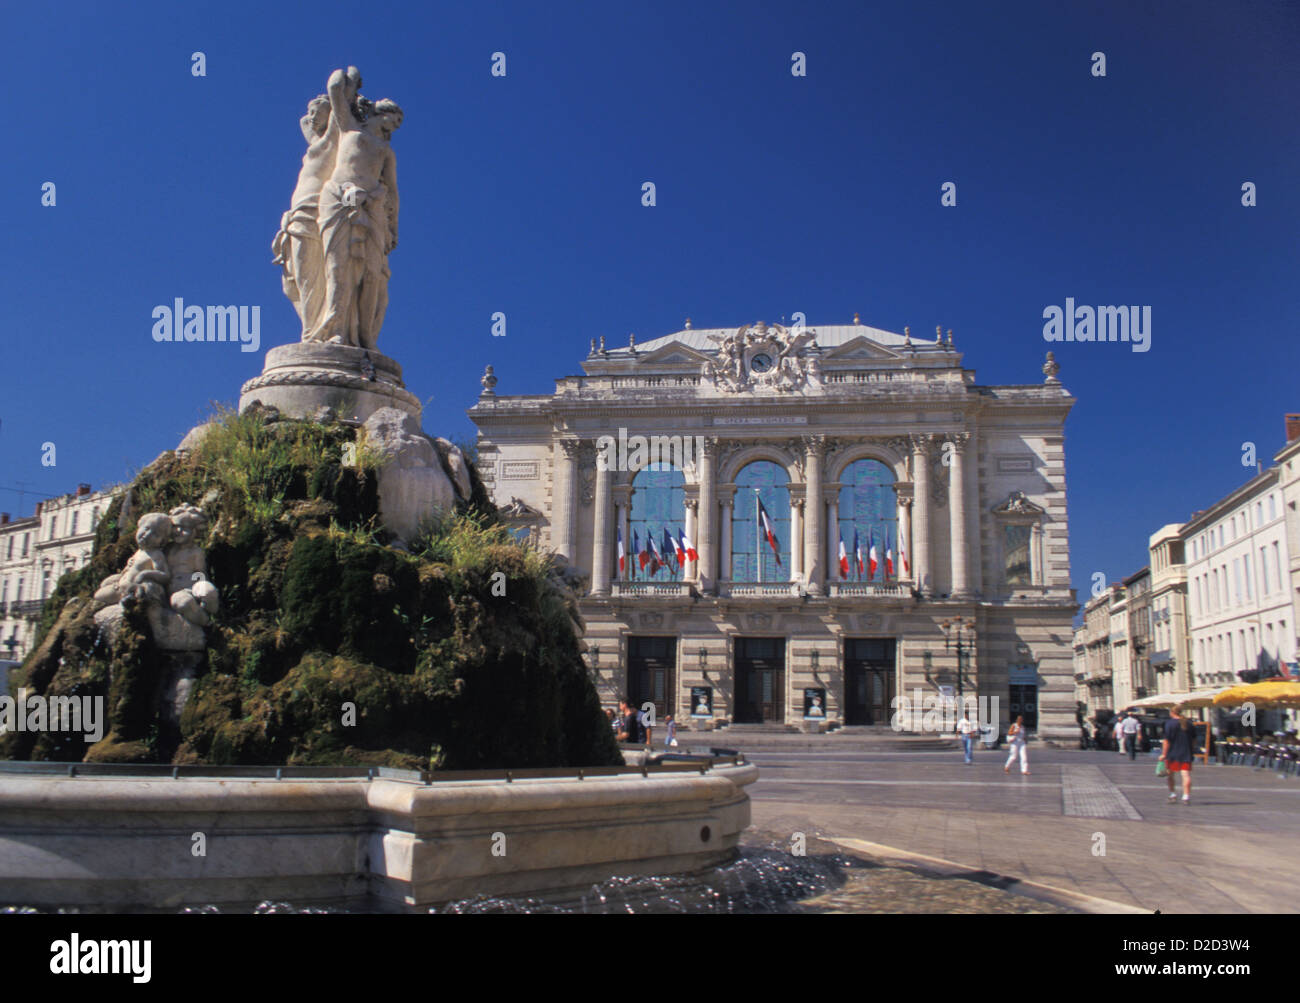 France. Montpellier. Place De La Comedie. Three Graces Fountain With The Opera Comedie In The Background. Stock Photo